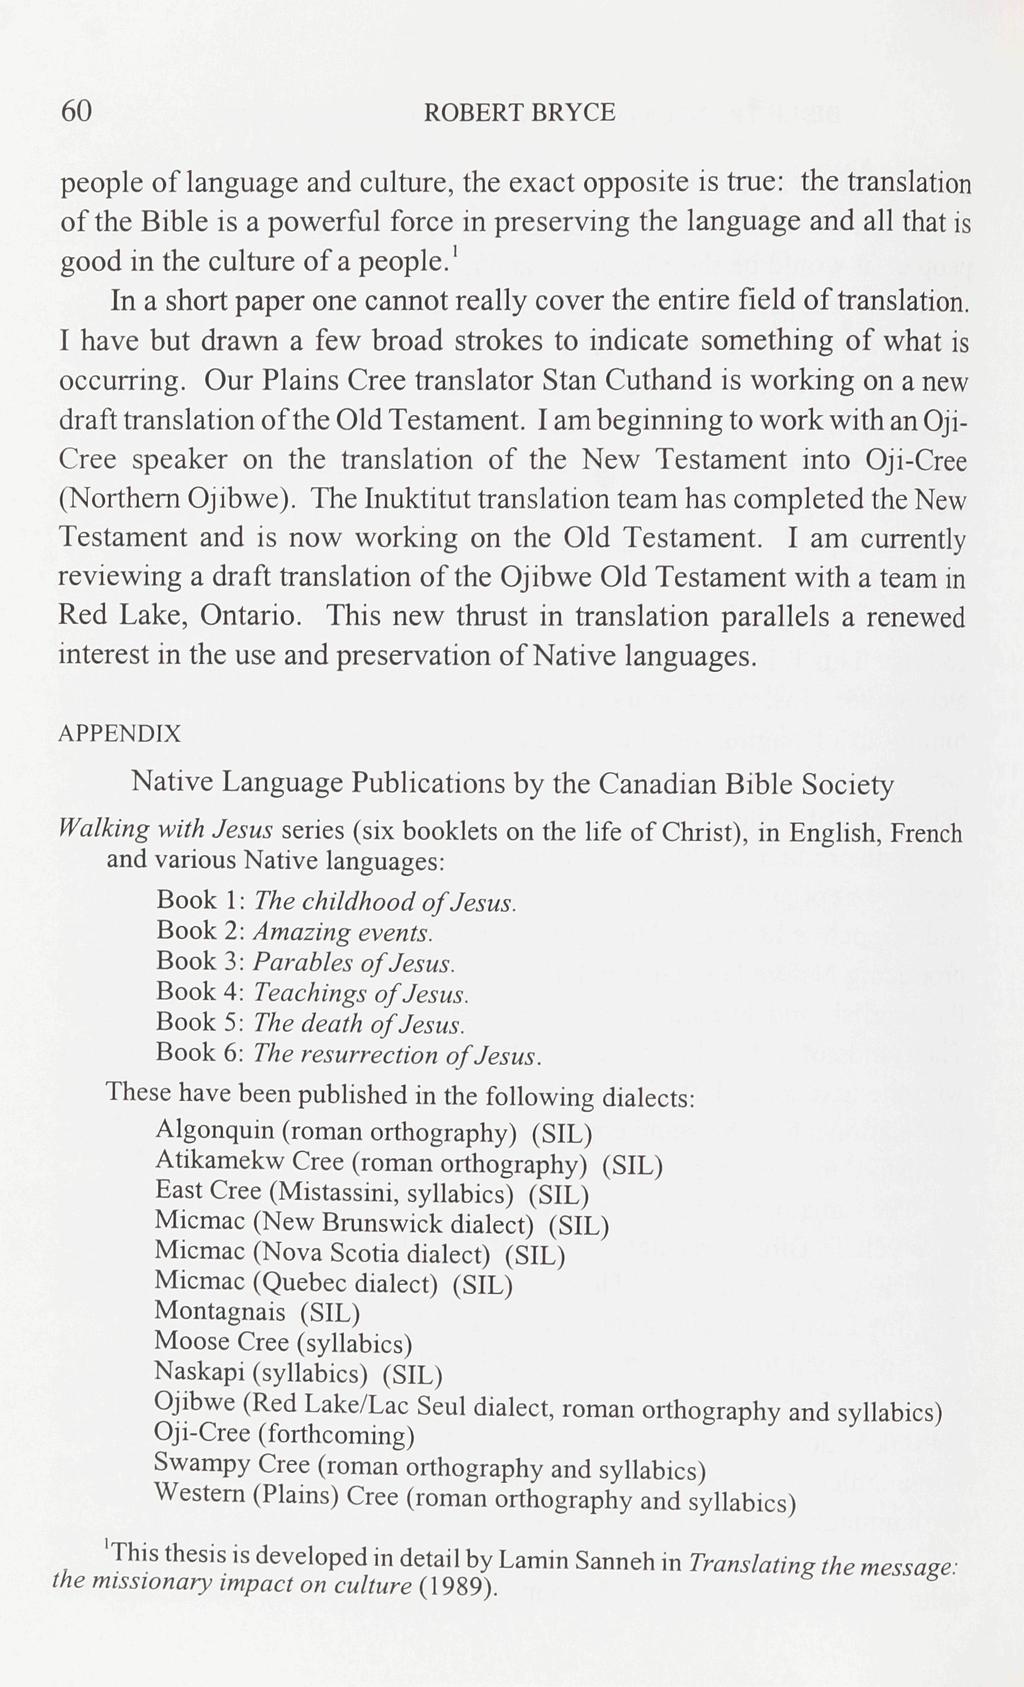 60 ROBERT BRYCE people of language and culture, the exact opposite is true: the translation of the Bible is a powerful force in preserving the language and all that is good in the culture of a people.